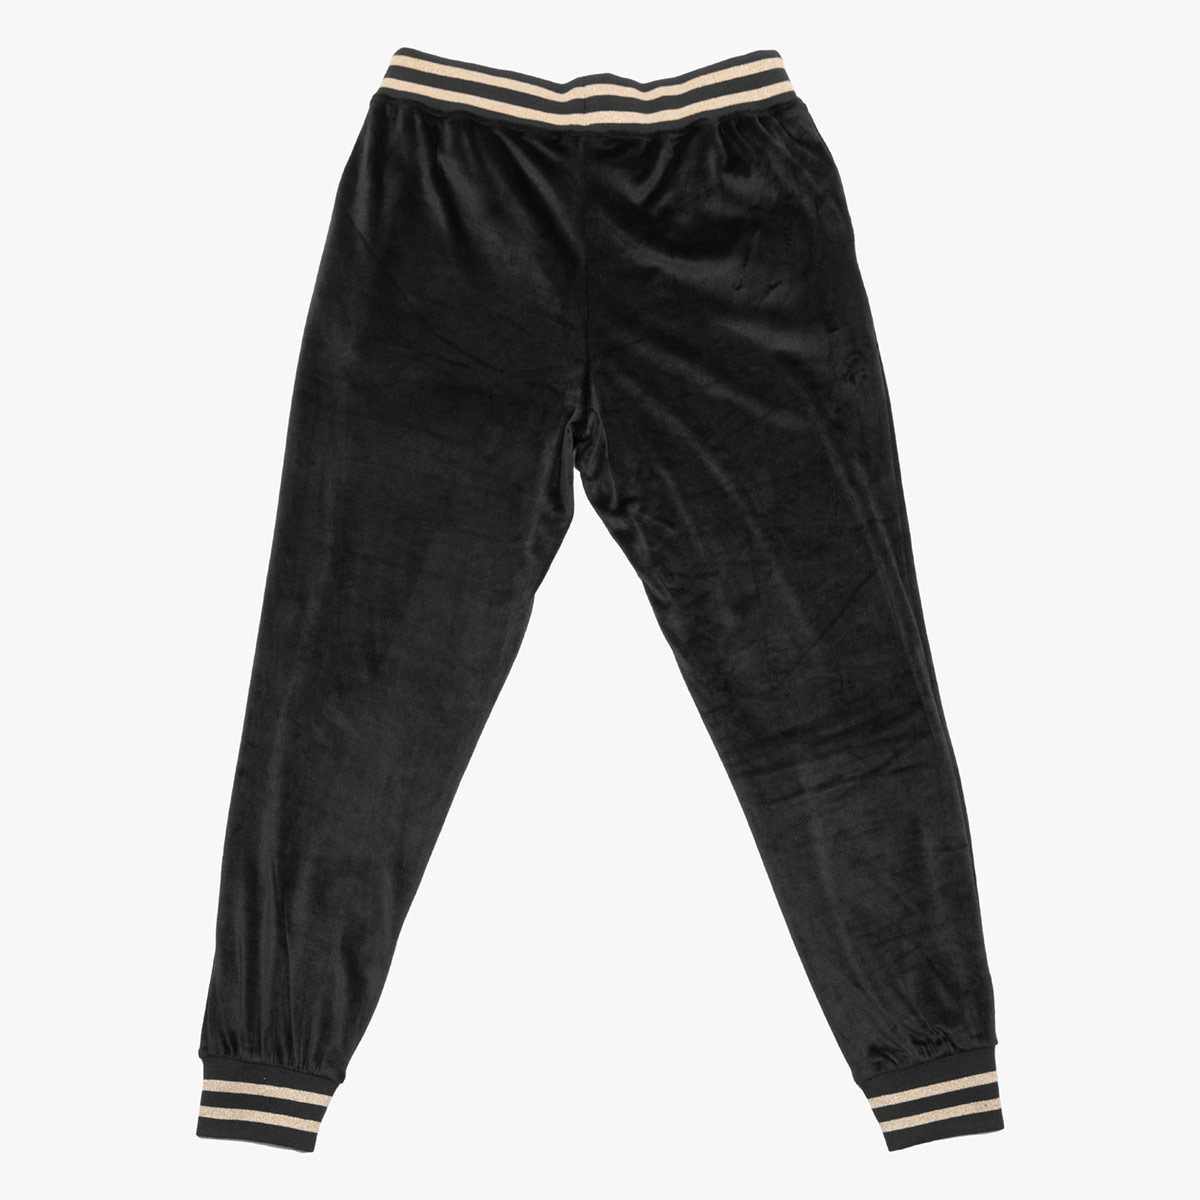 Velour Black and Metallic Gold Joggers by Hard Rock image number 2